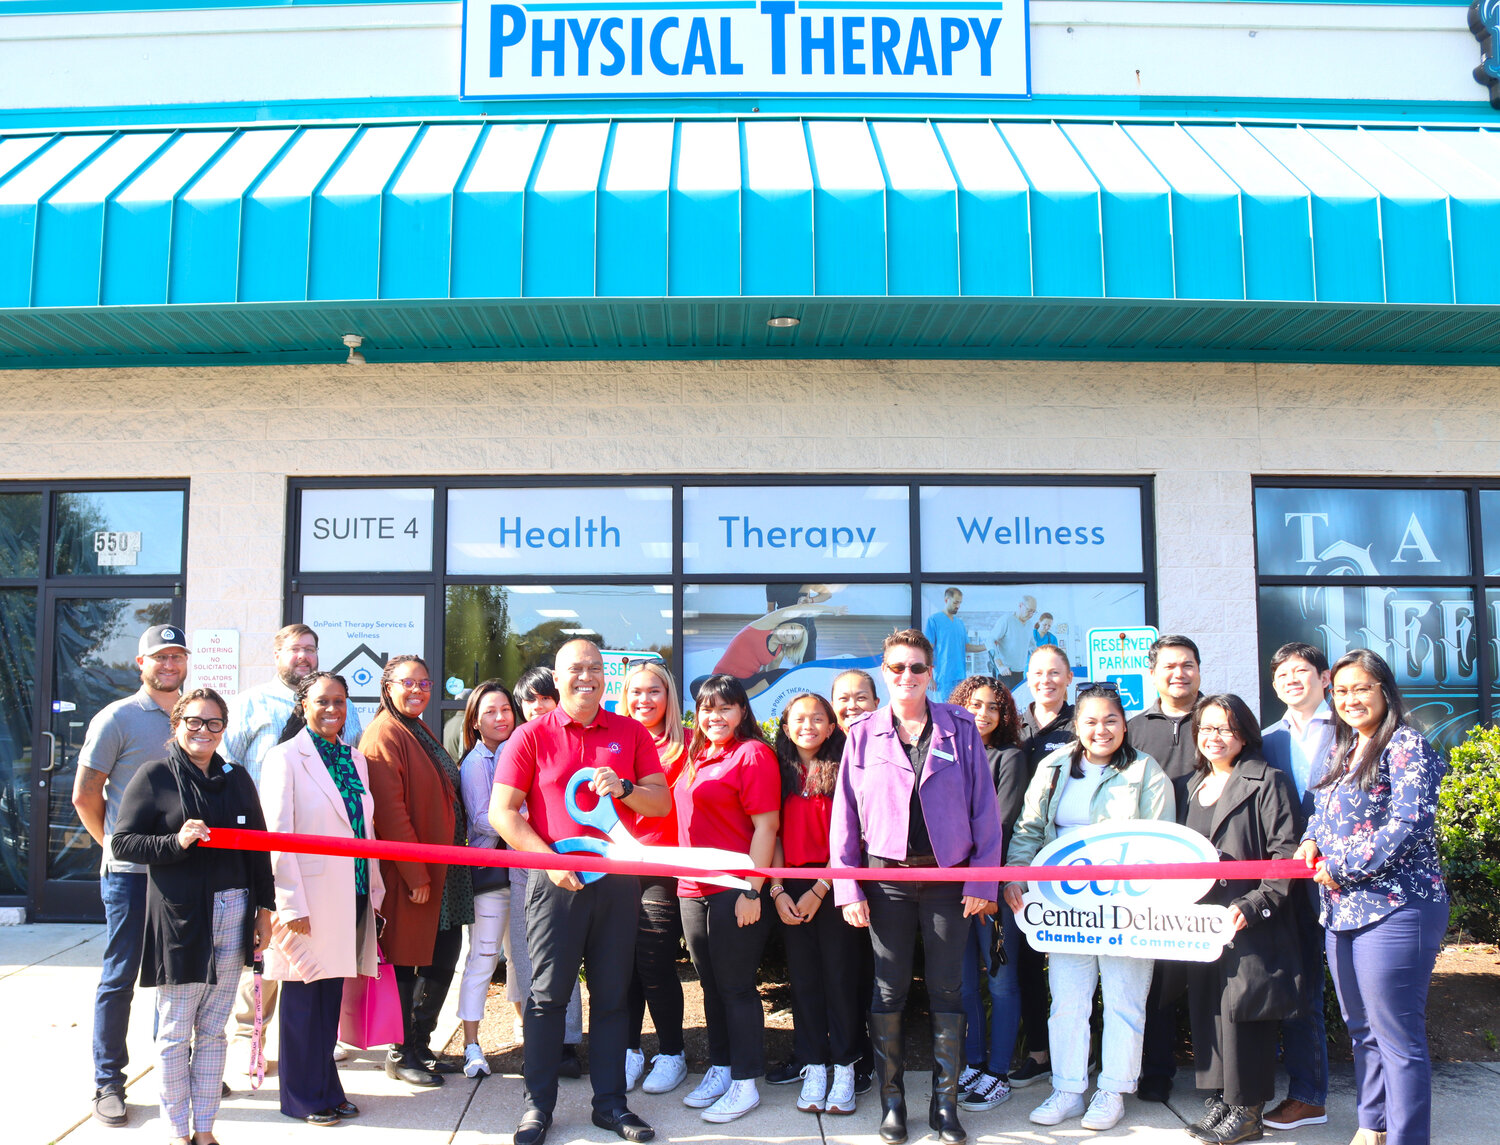 Central Delaware Chamber of Commerce members and friends joined OnPoint Therapy & Wellness CEO and physical therapist Leo Fernandez and the OnPoint team to celebrate the grand opening.